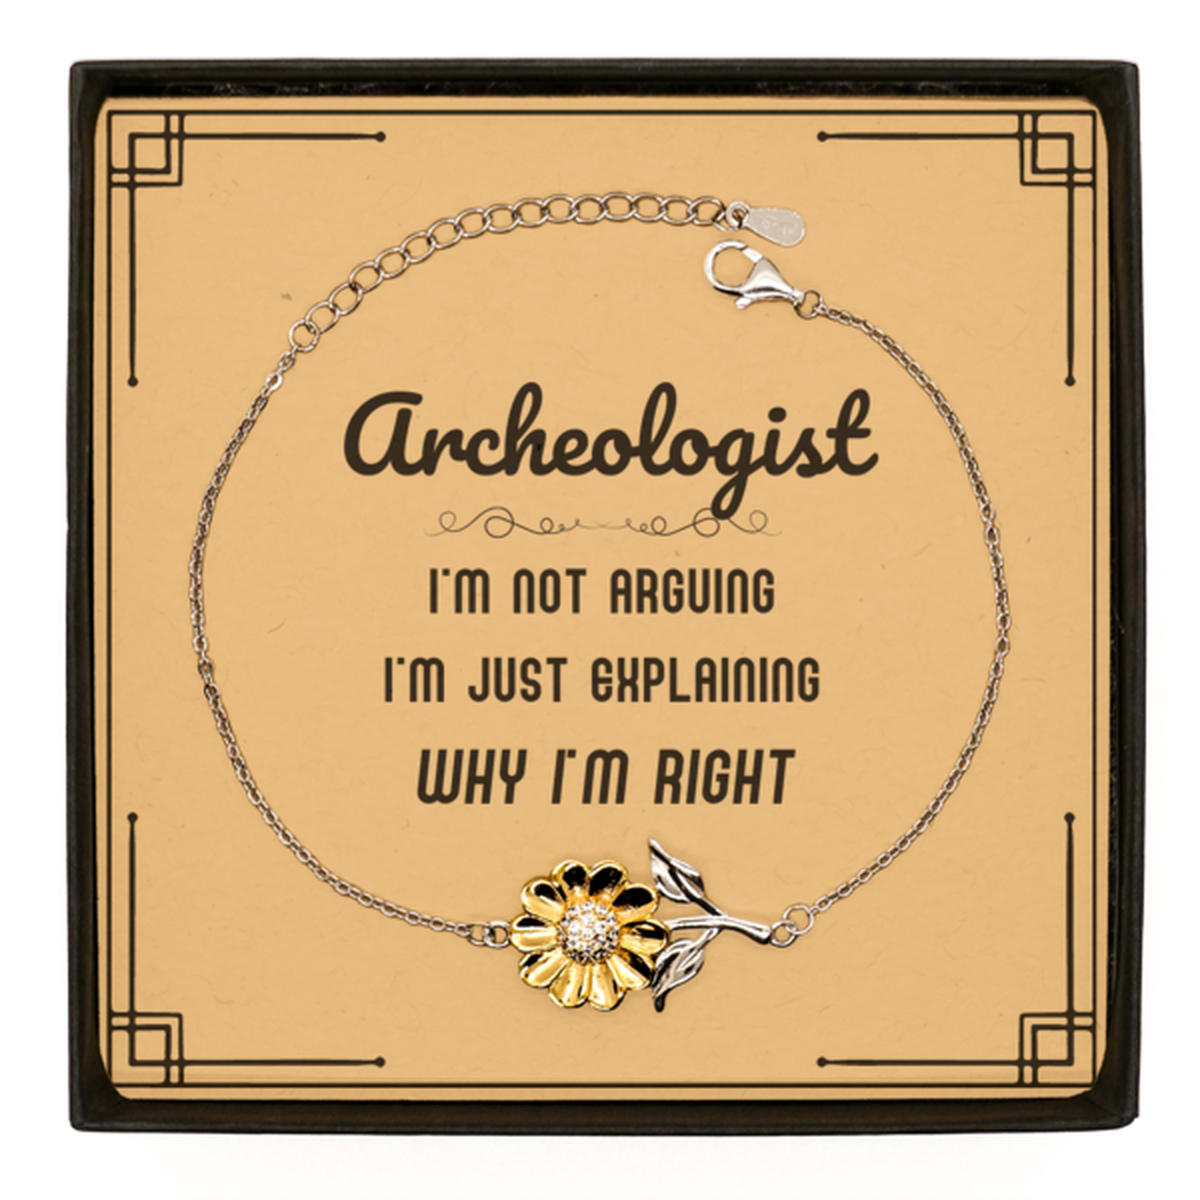 Archeologist I'm not Arguing. I'm Just Explaining Why I'm RIGHT Sunflower Bracelet, Funny Saying Quote Archeologist Gifts For Archeologist Message Card Graduation Birthday Christmas Gifts for Men Women Coworker